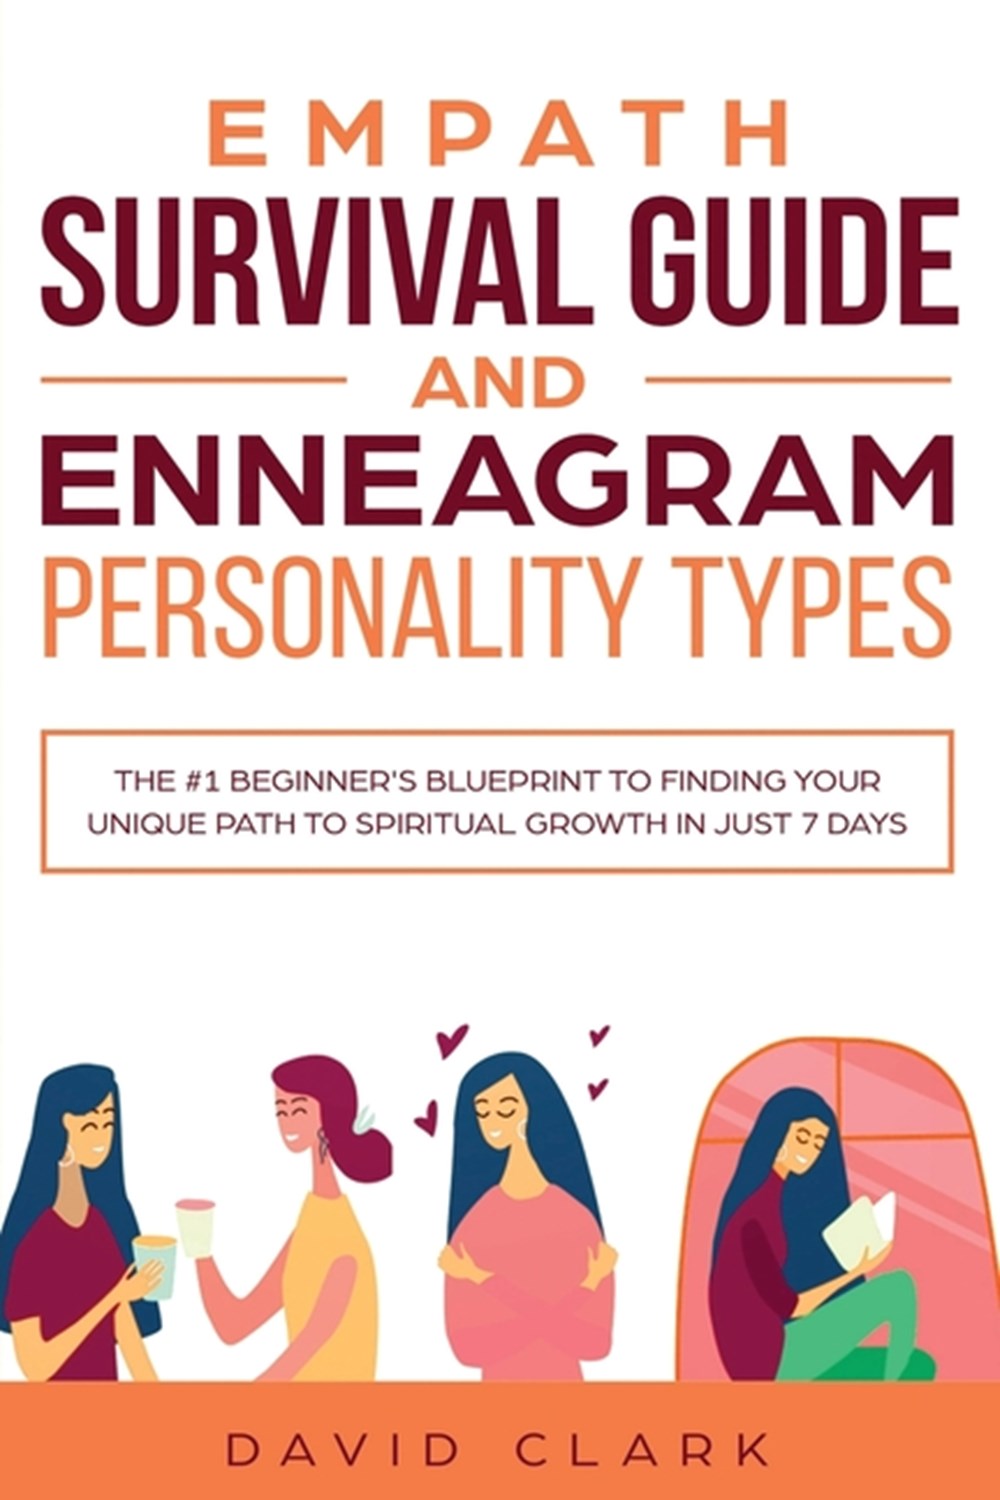 Empath Survival Guide And Enneagram Personality Types The #1 Beginner's Blueprint to Finding Your Un